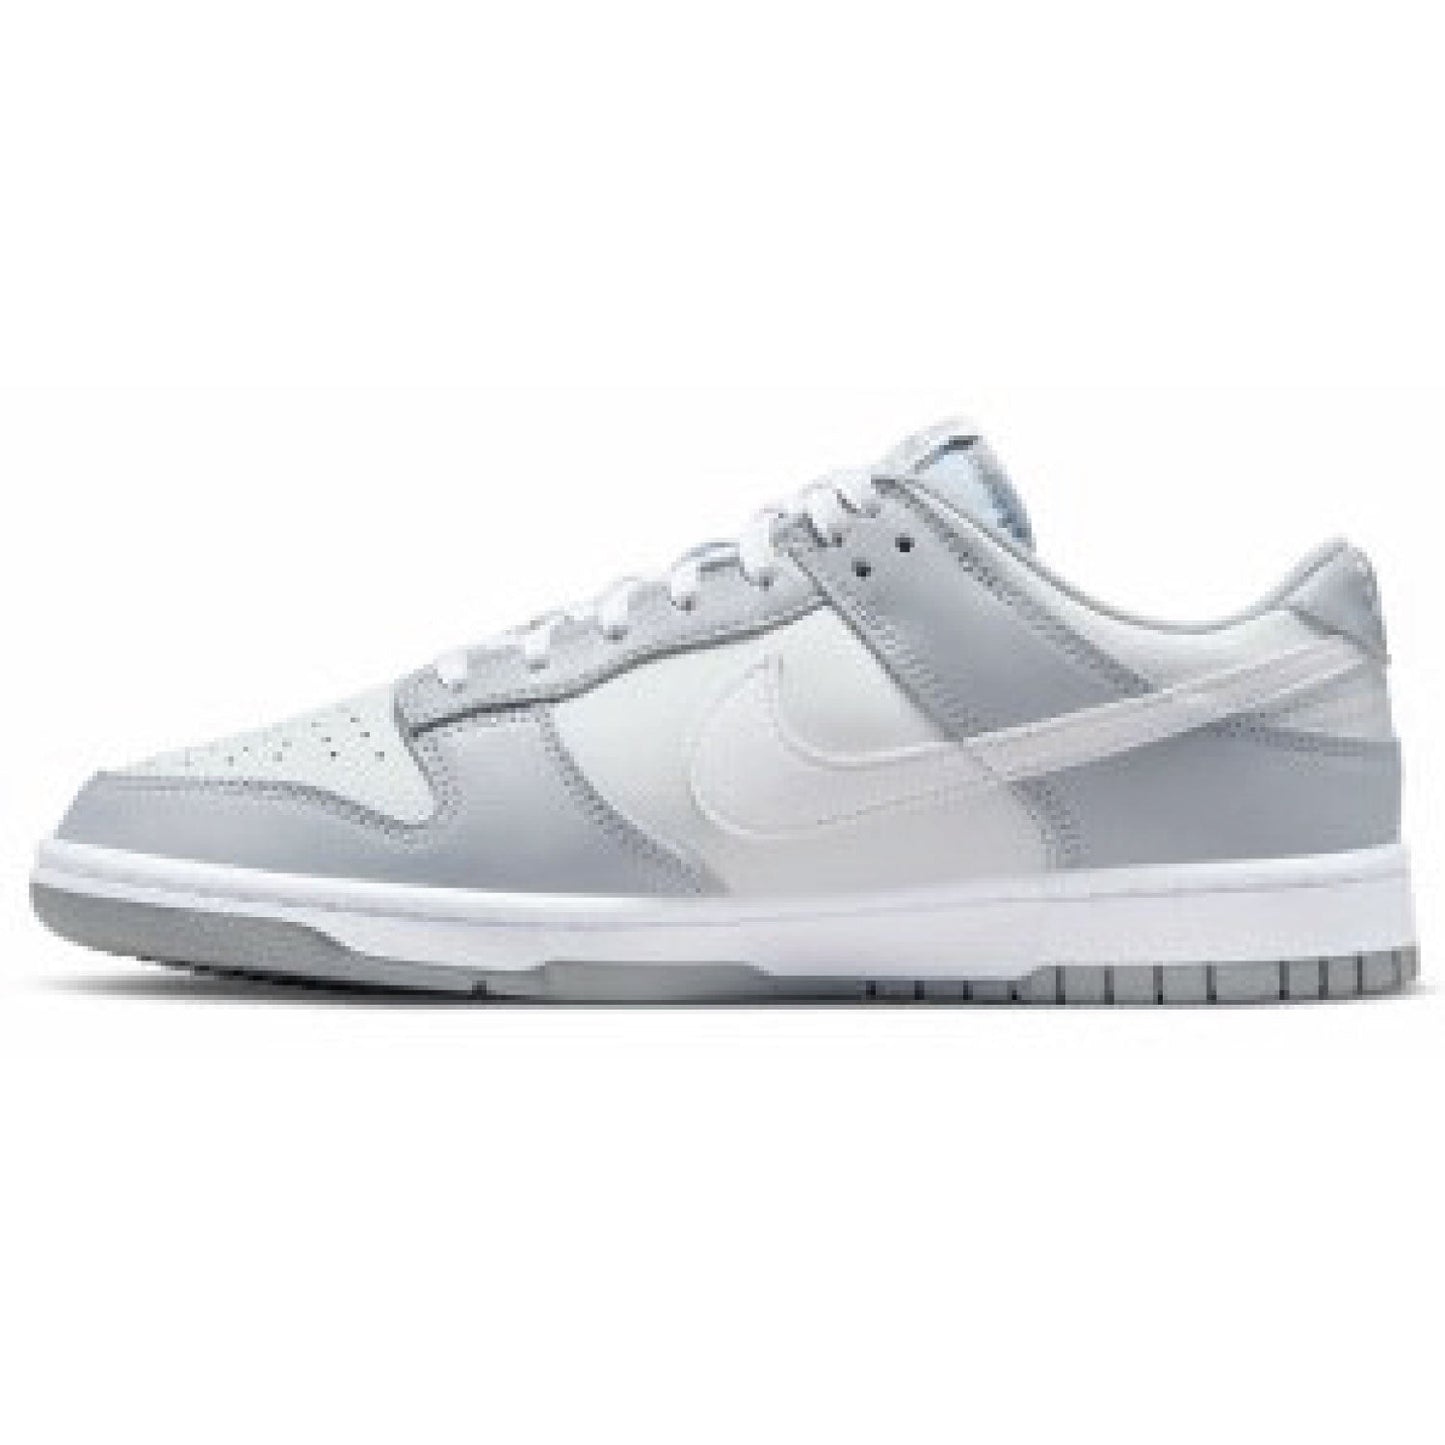 This is the left shoe of Dunk Low Cloud Grey White.